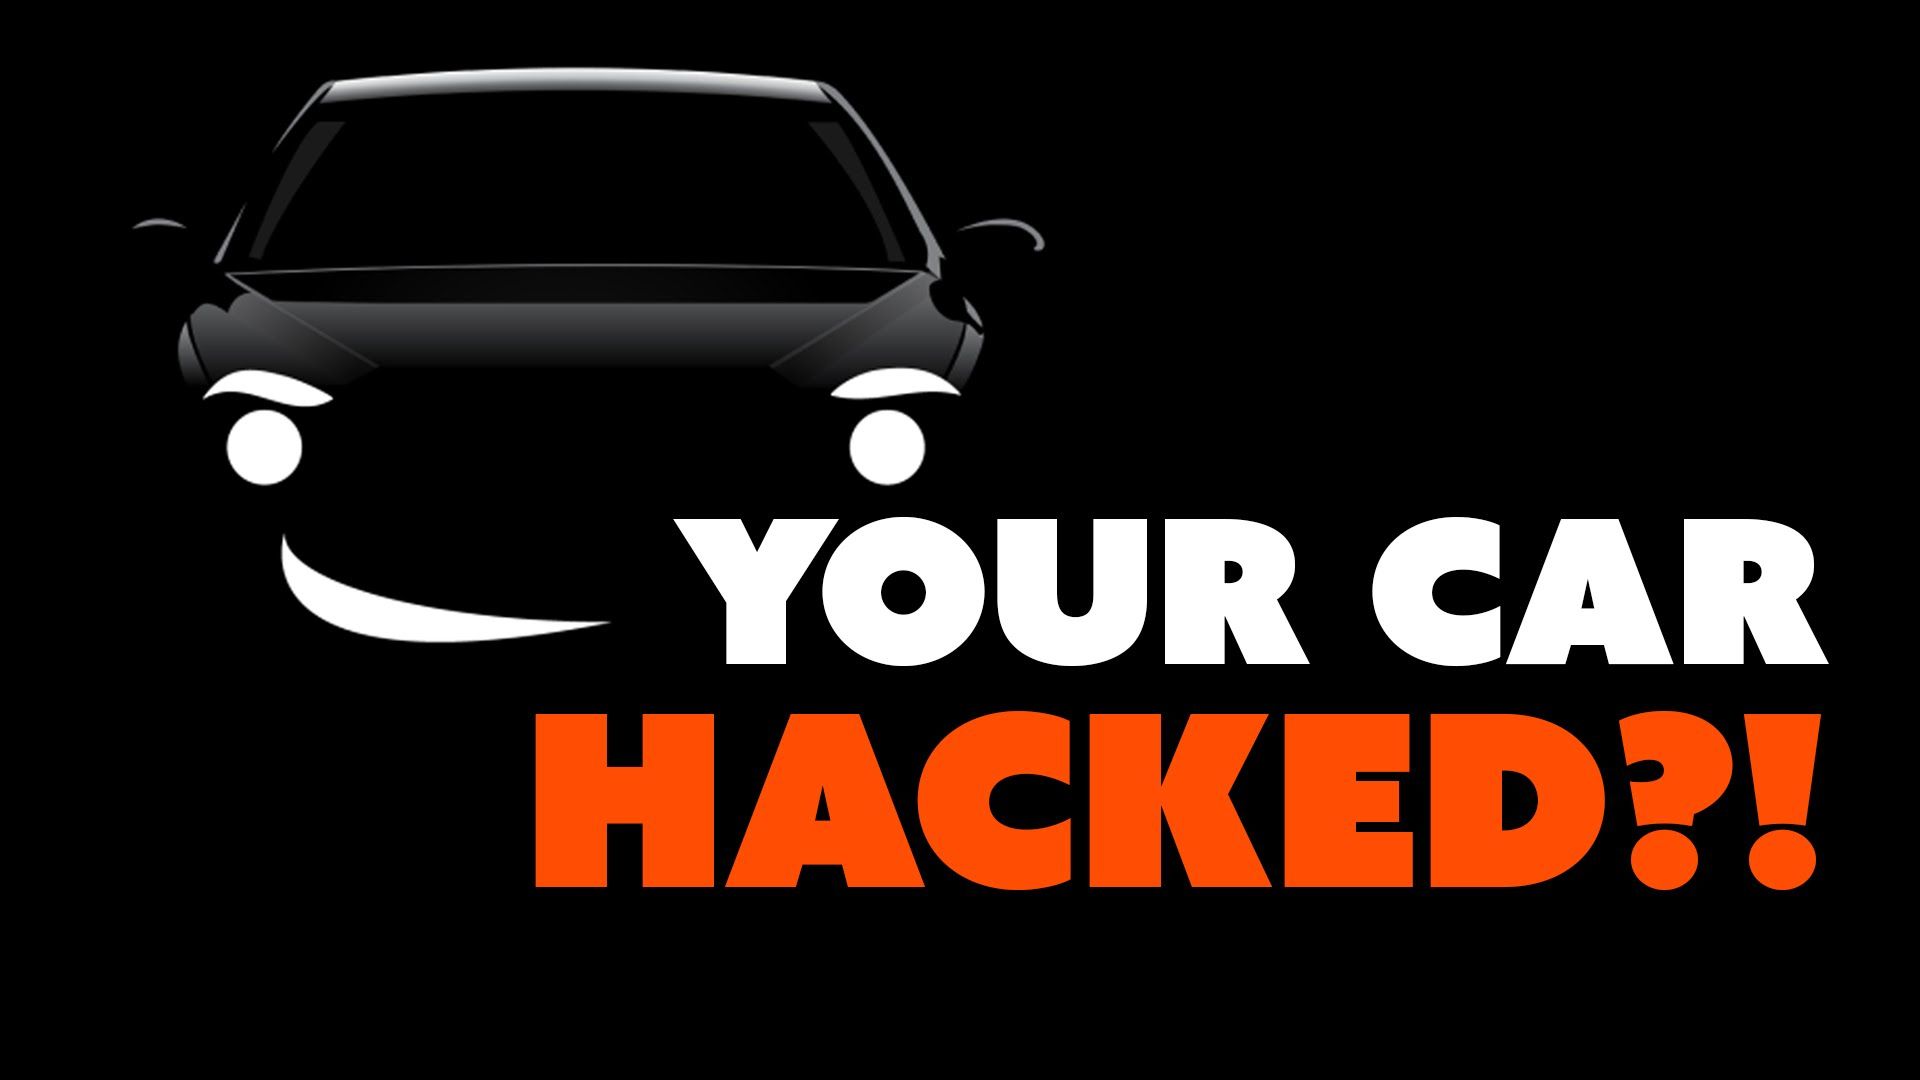 Relevant Details About Car Hacking & Its Safety Measures